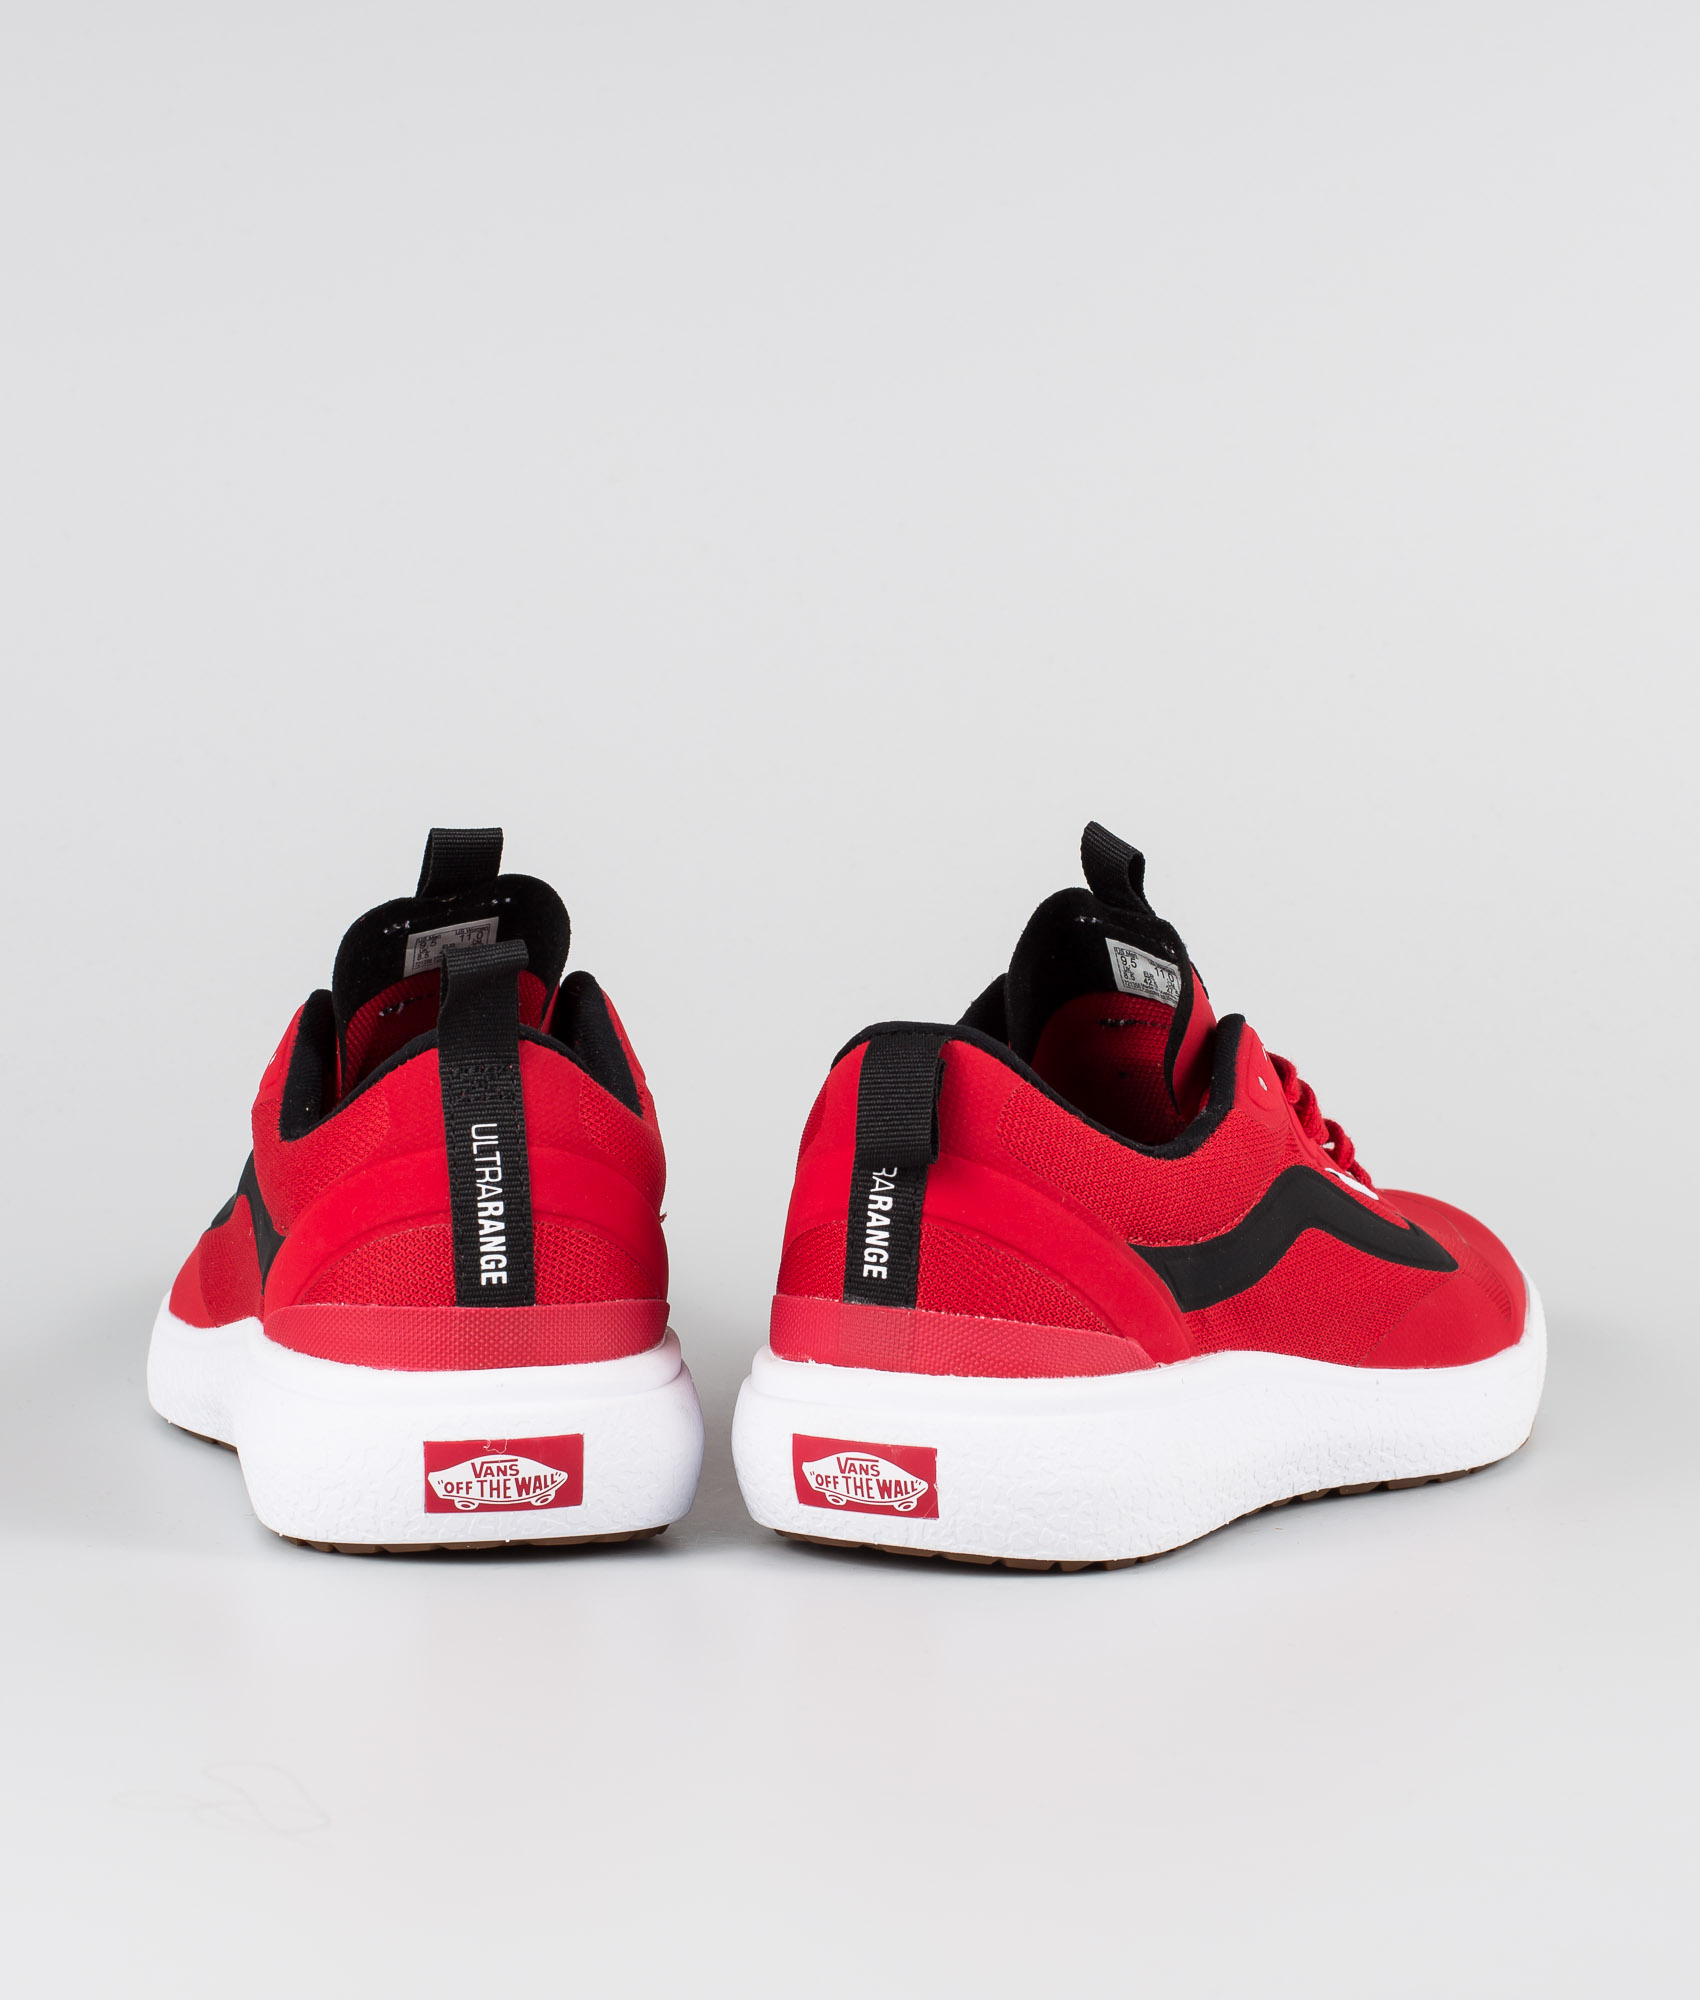 vans off the wall shoes red